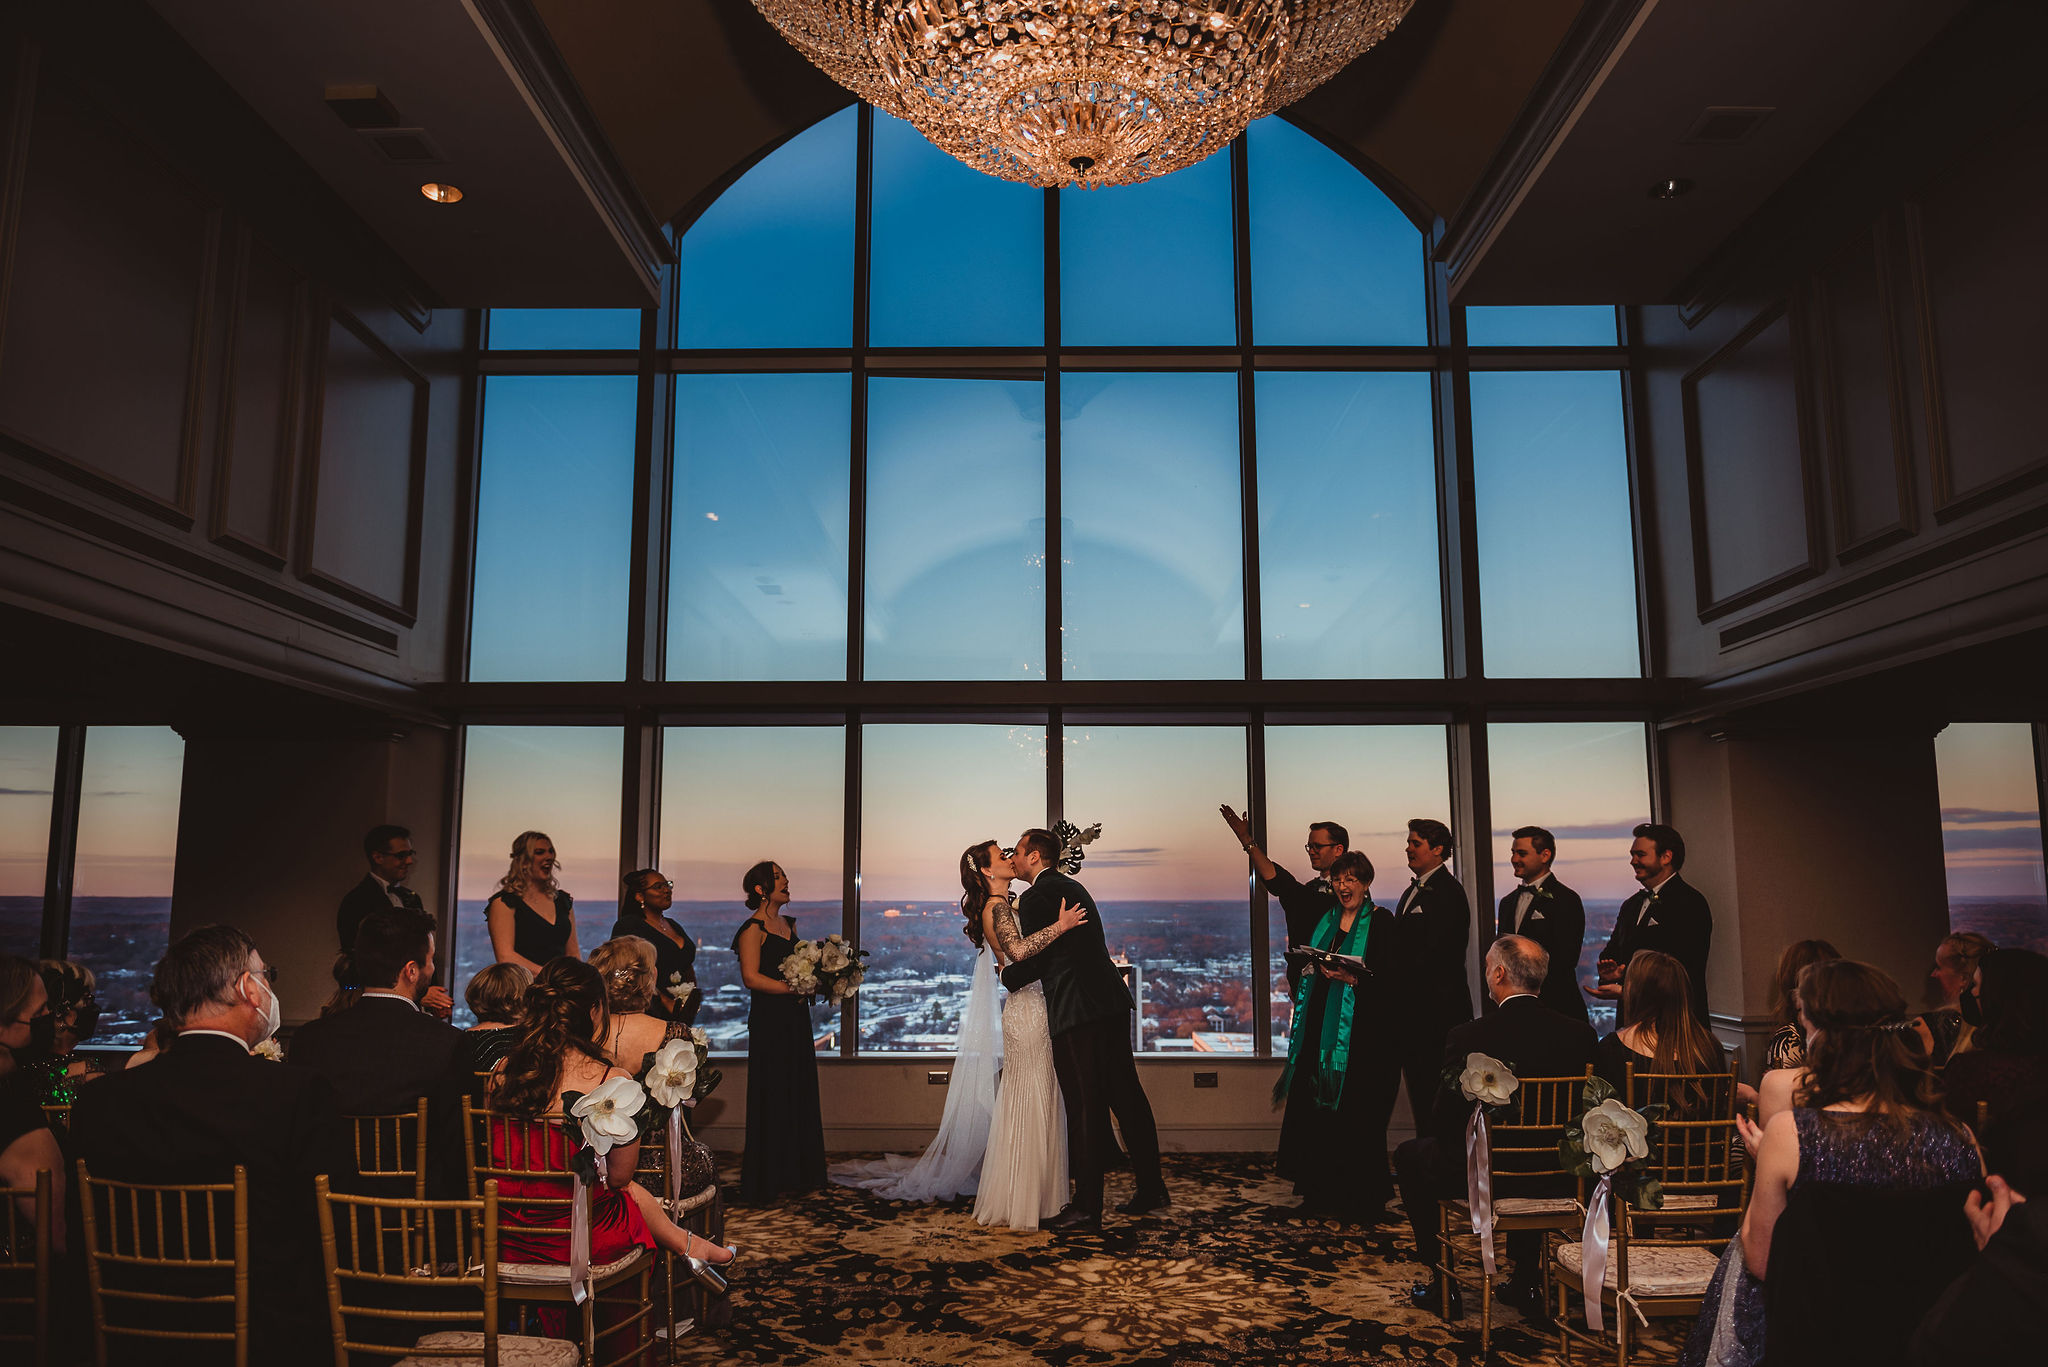 A bride and groom share their first kiss as husband and wife at the end of their ceremony, in front of large windows showing a view of a city.